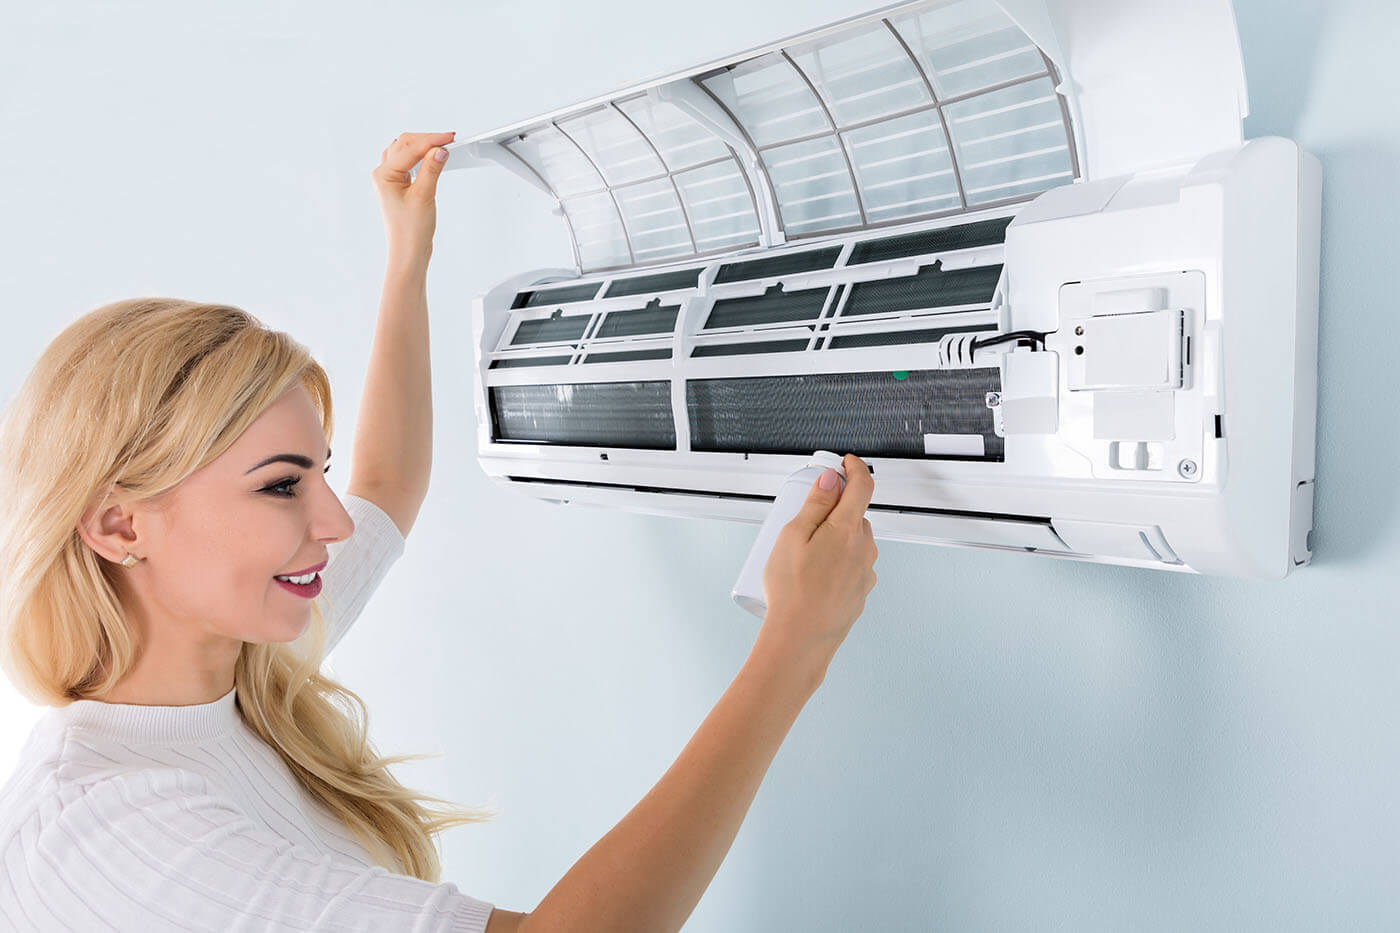 How often should an air conditioner be serviced?